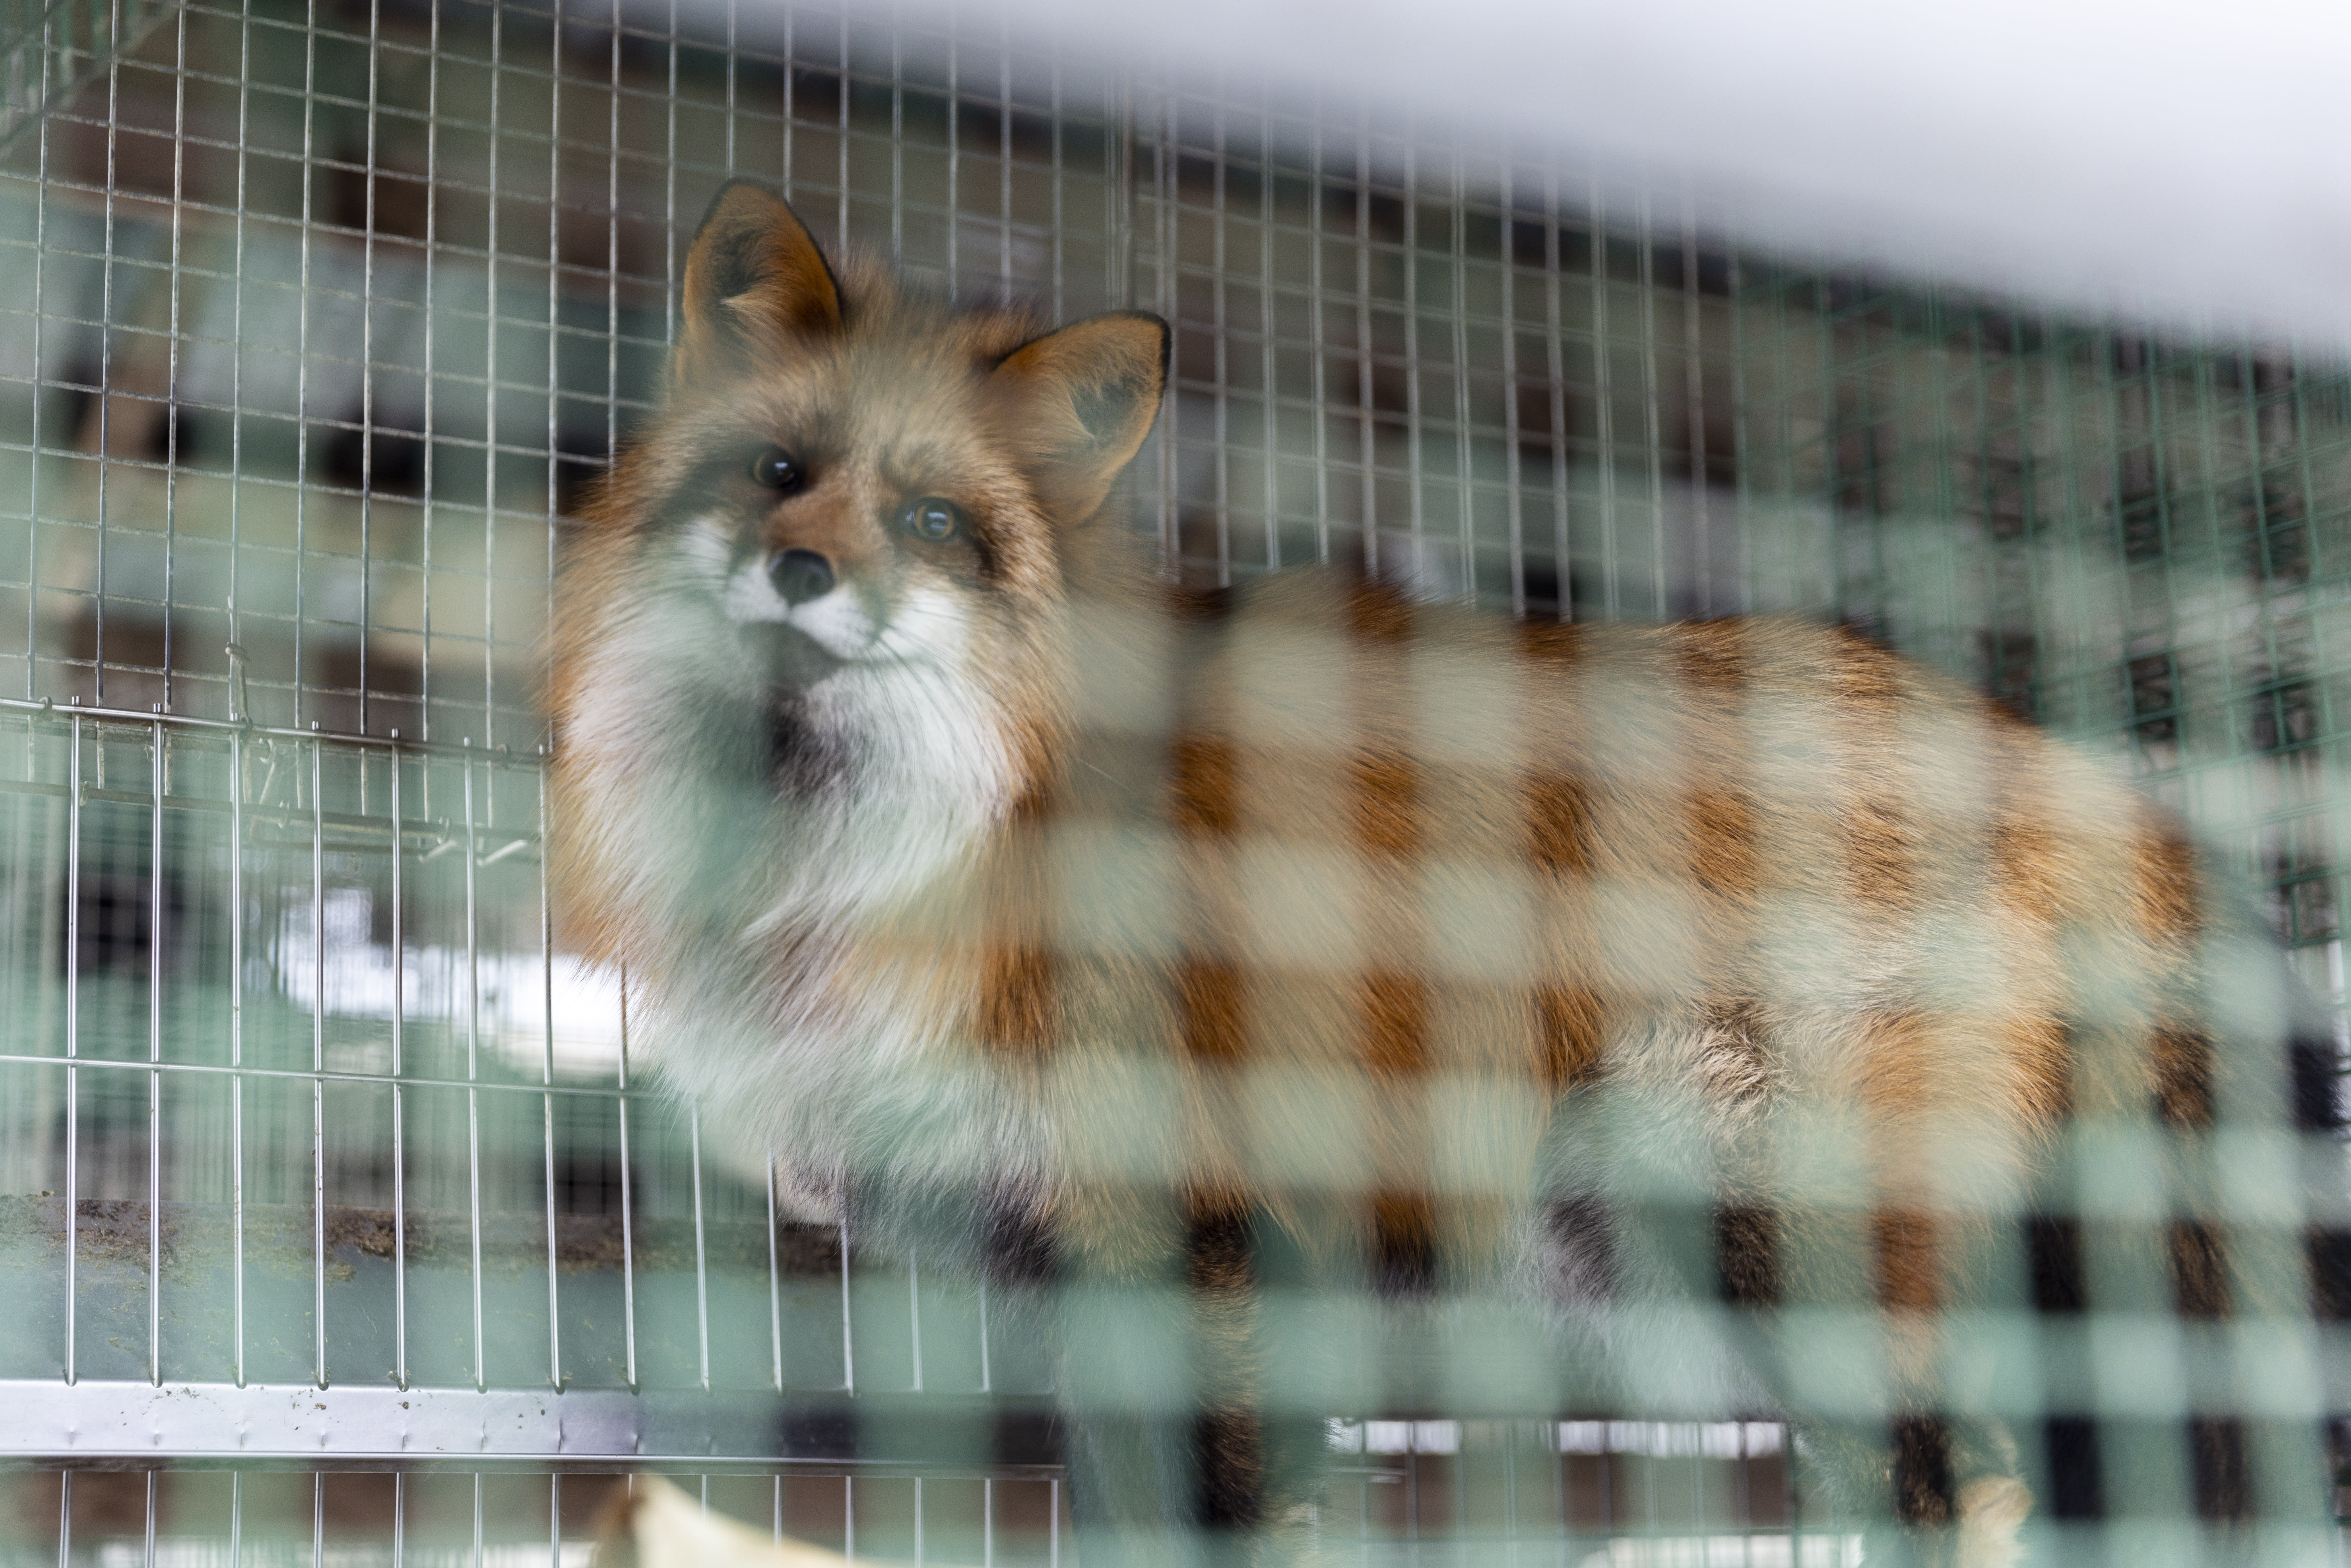 All animals are slaughtered in fur farms infected with bird flu